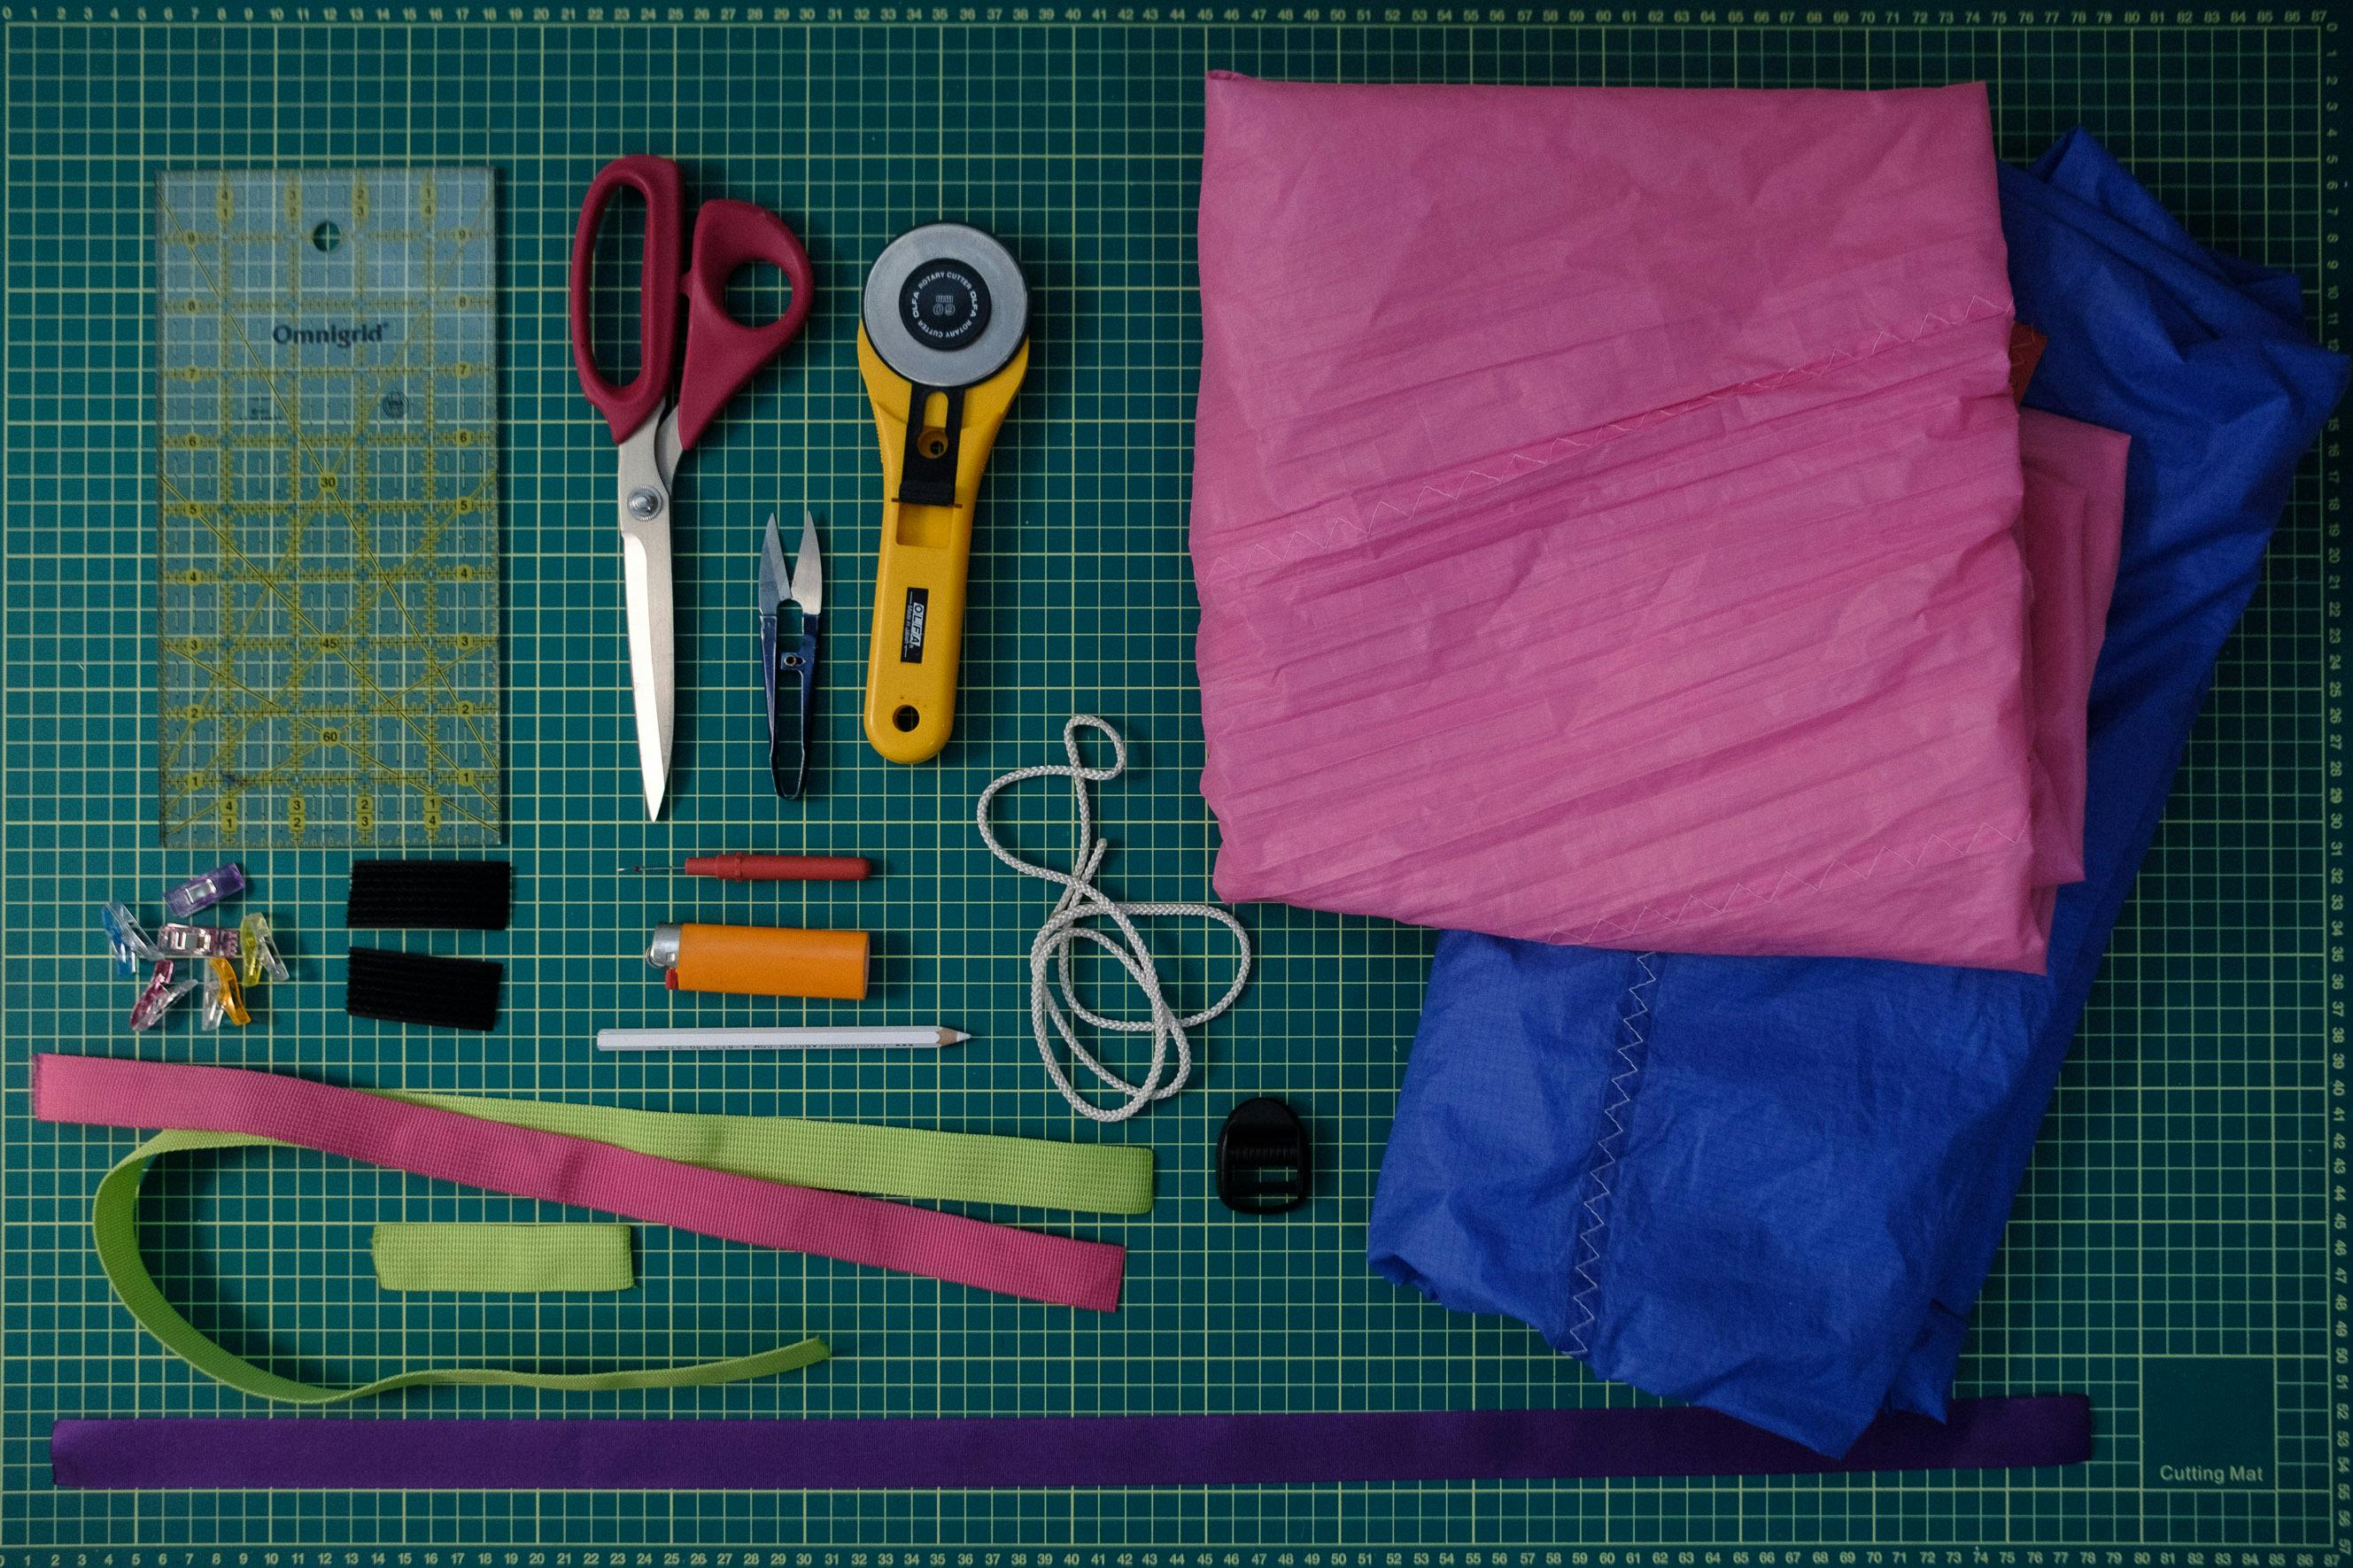 All the tools and materials to get started.